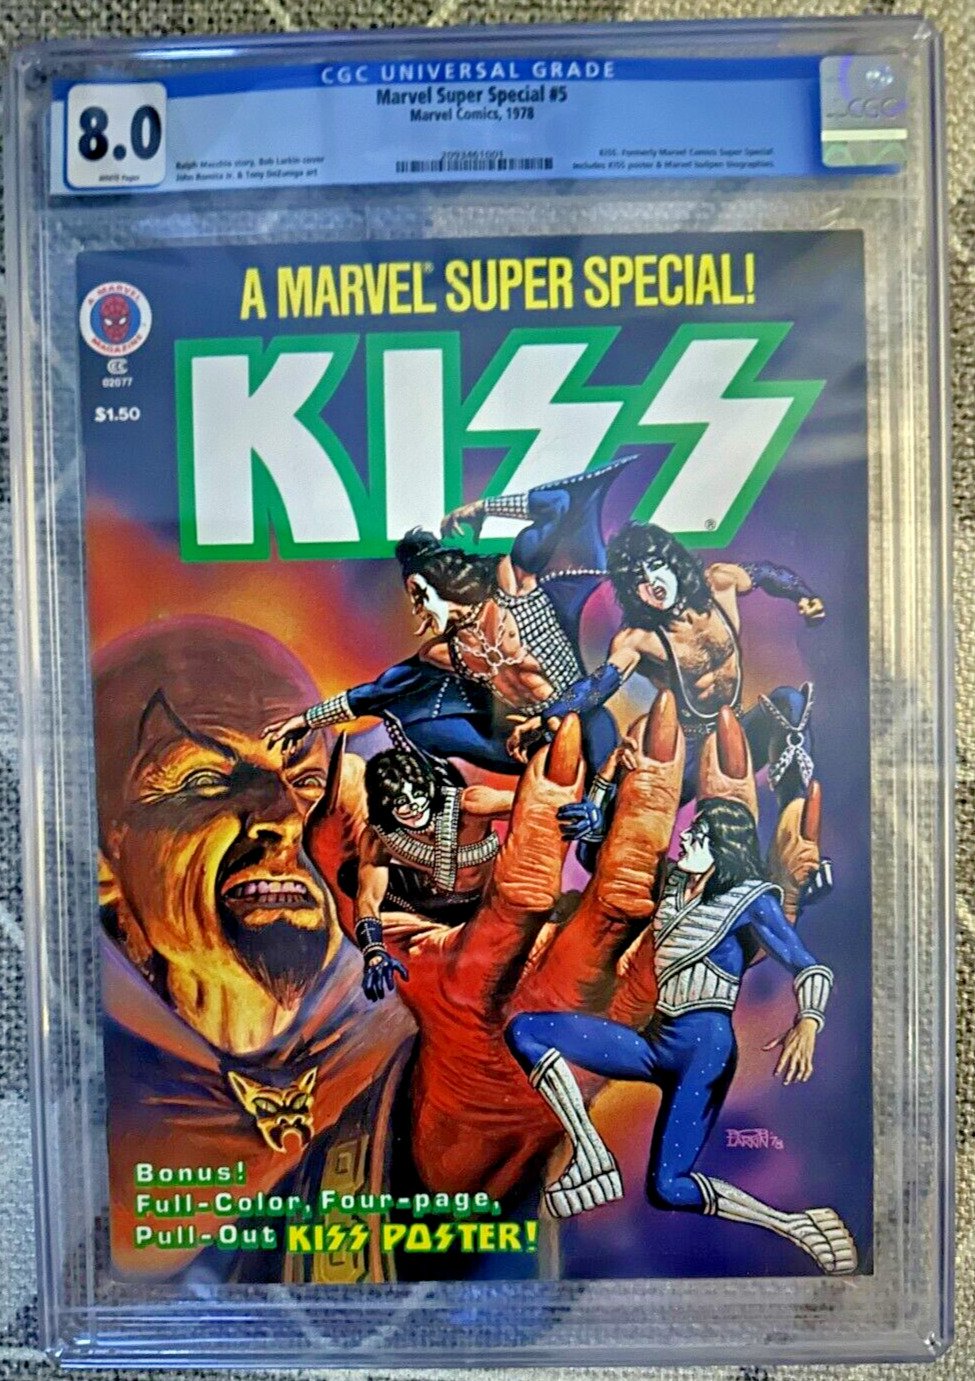 Marvel Super Special #5 Kiss comic CGC 8.0 with Poster